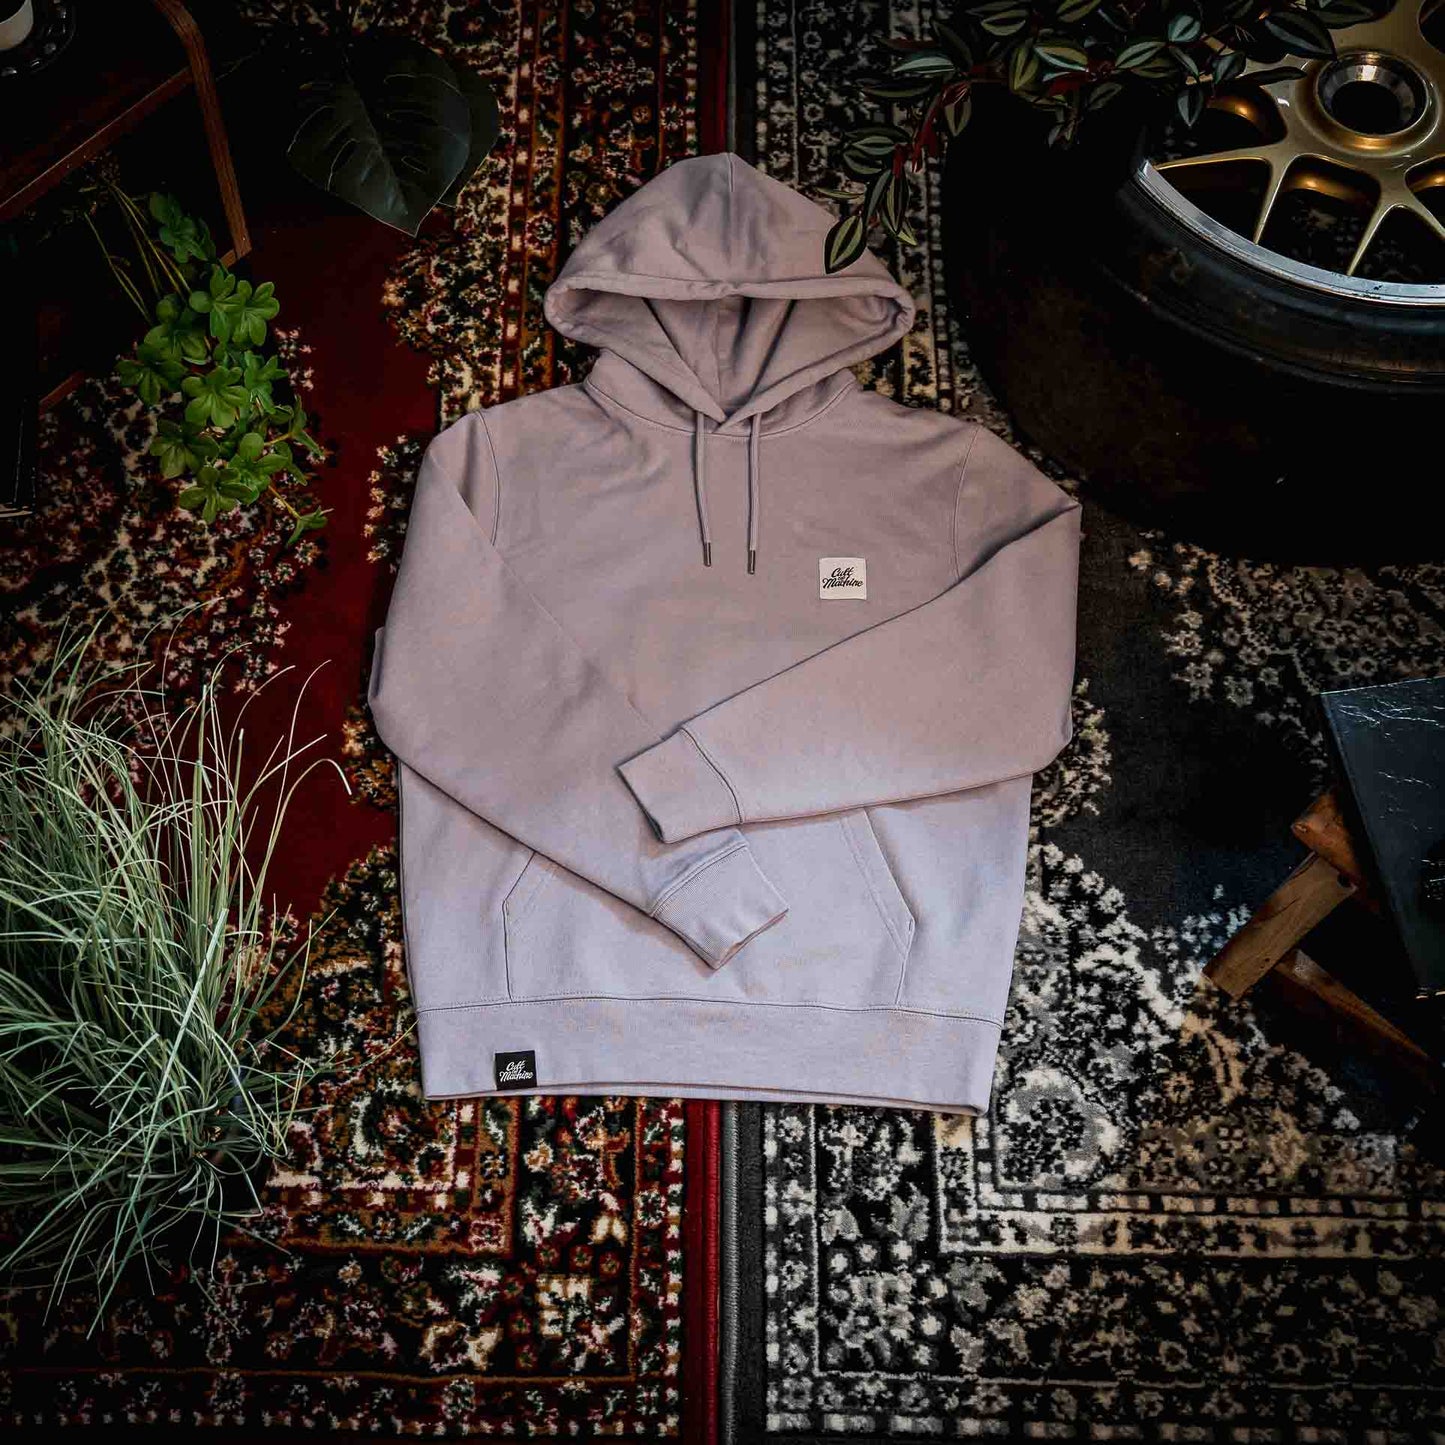 Core Cult Of Machine. Hoody. Lilac